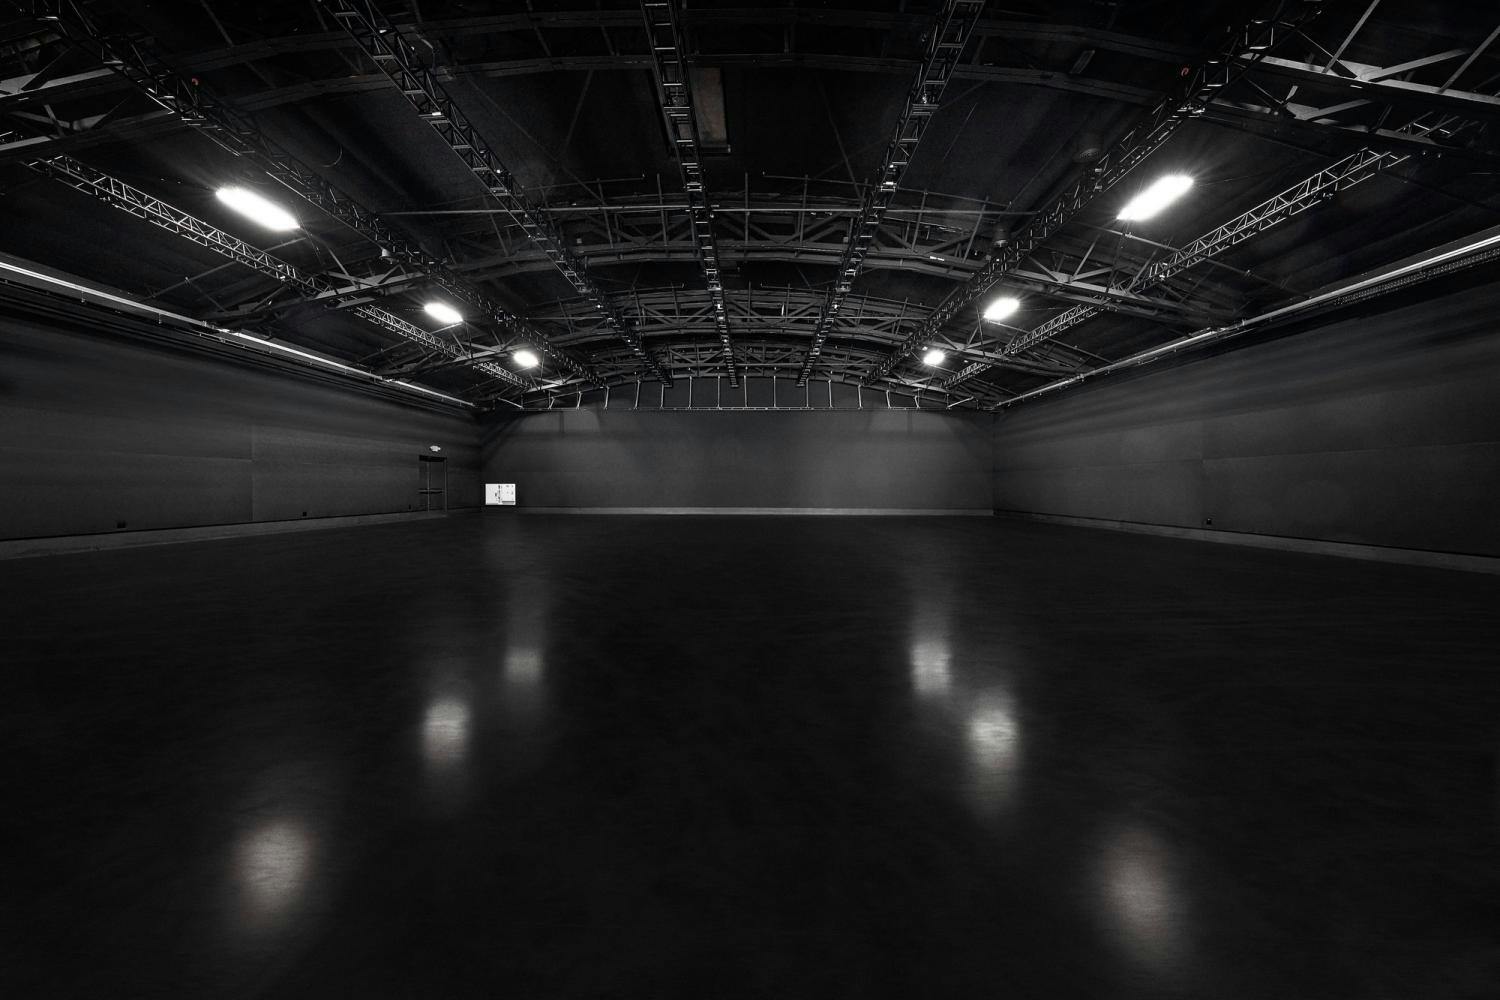 A dark, empty industrial studio with overhead stage lighting and polished floors.